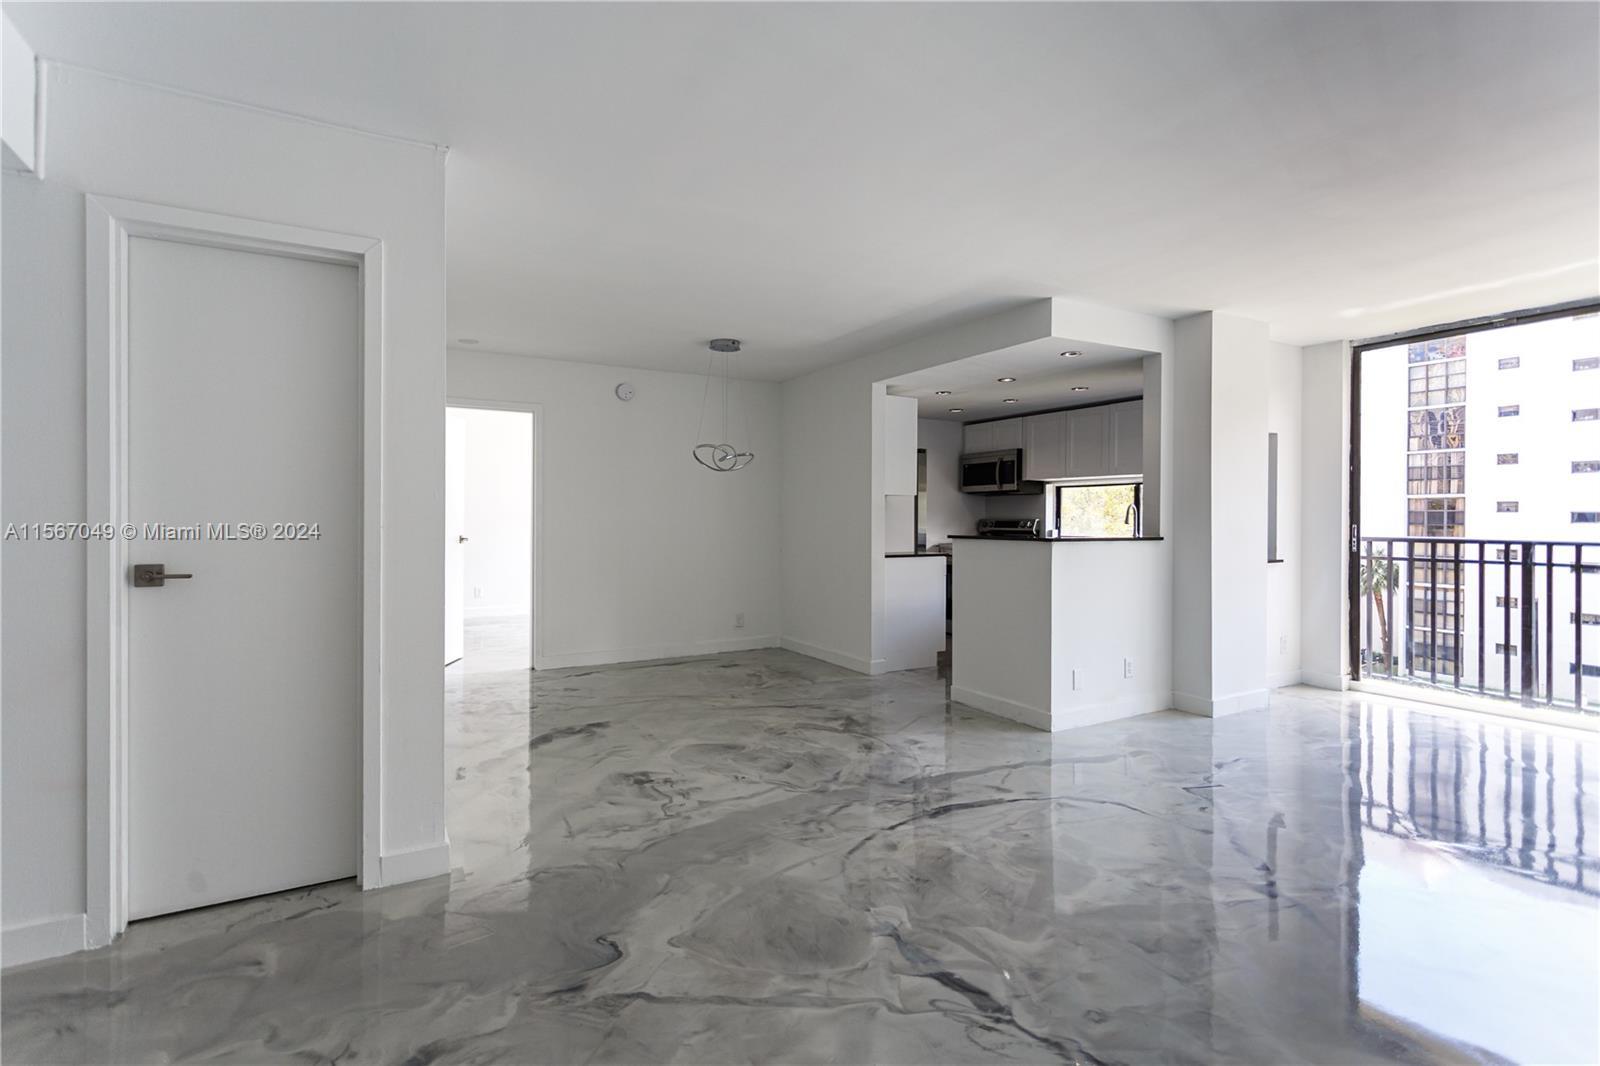 This is a completely remodeled unit. It is located in the heart of Sunny Isles Beach, Florida's Rivi